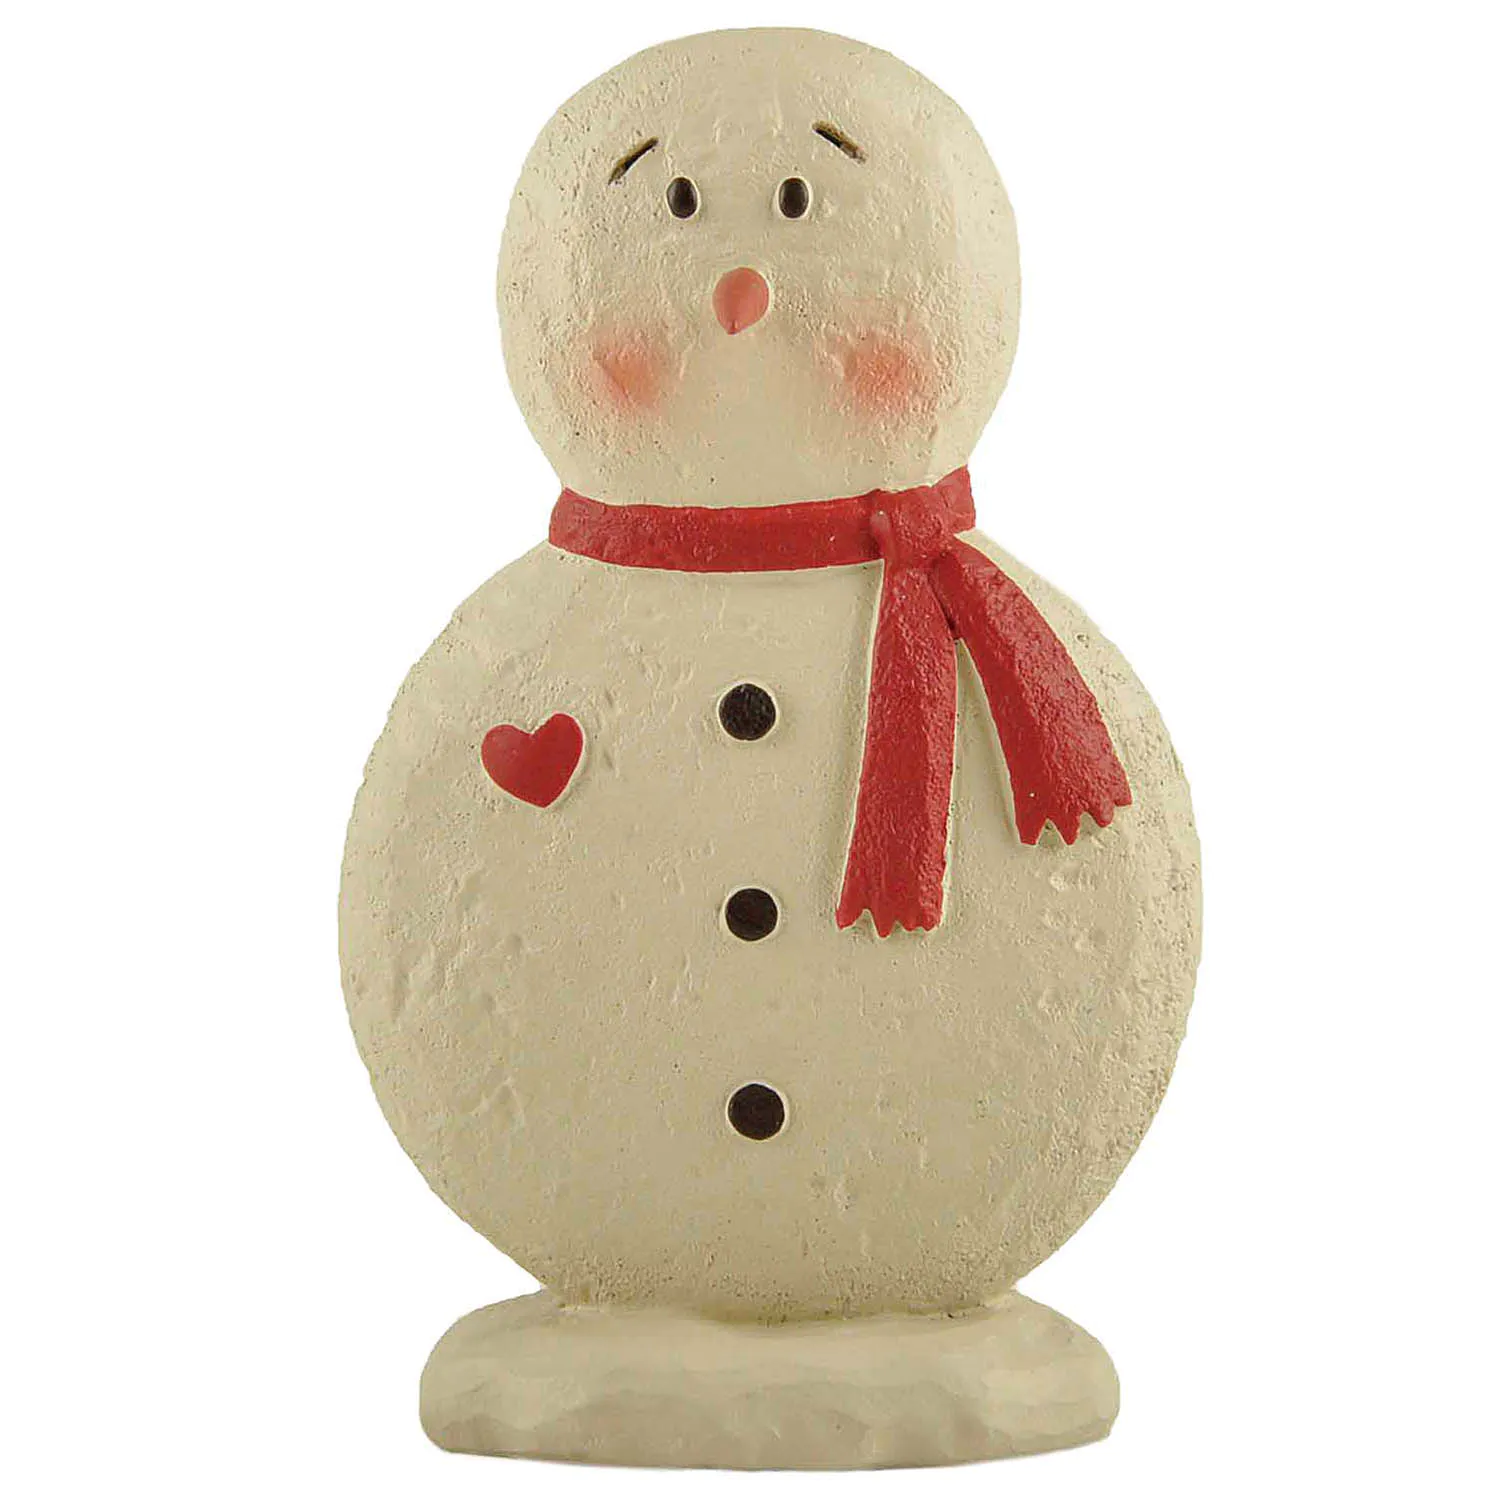 Customized Resin Cgristmas Crafts Cute Snowman w Red Heart & Scarf Figurines for Home Decor 238-13739